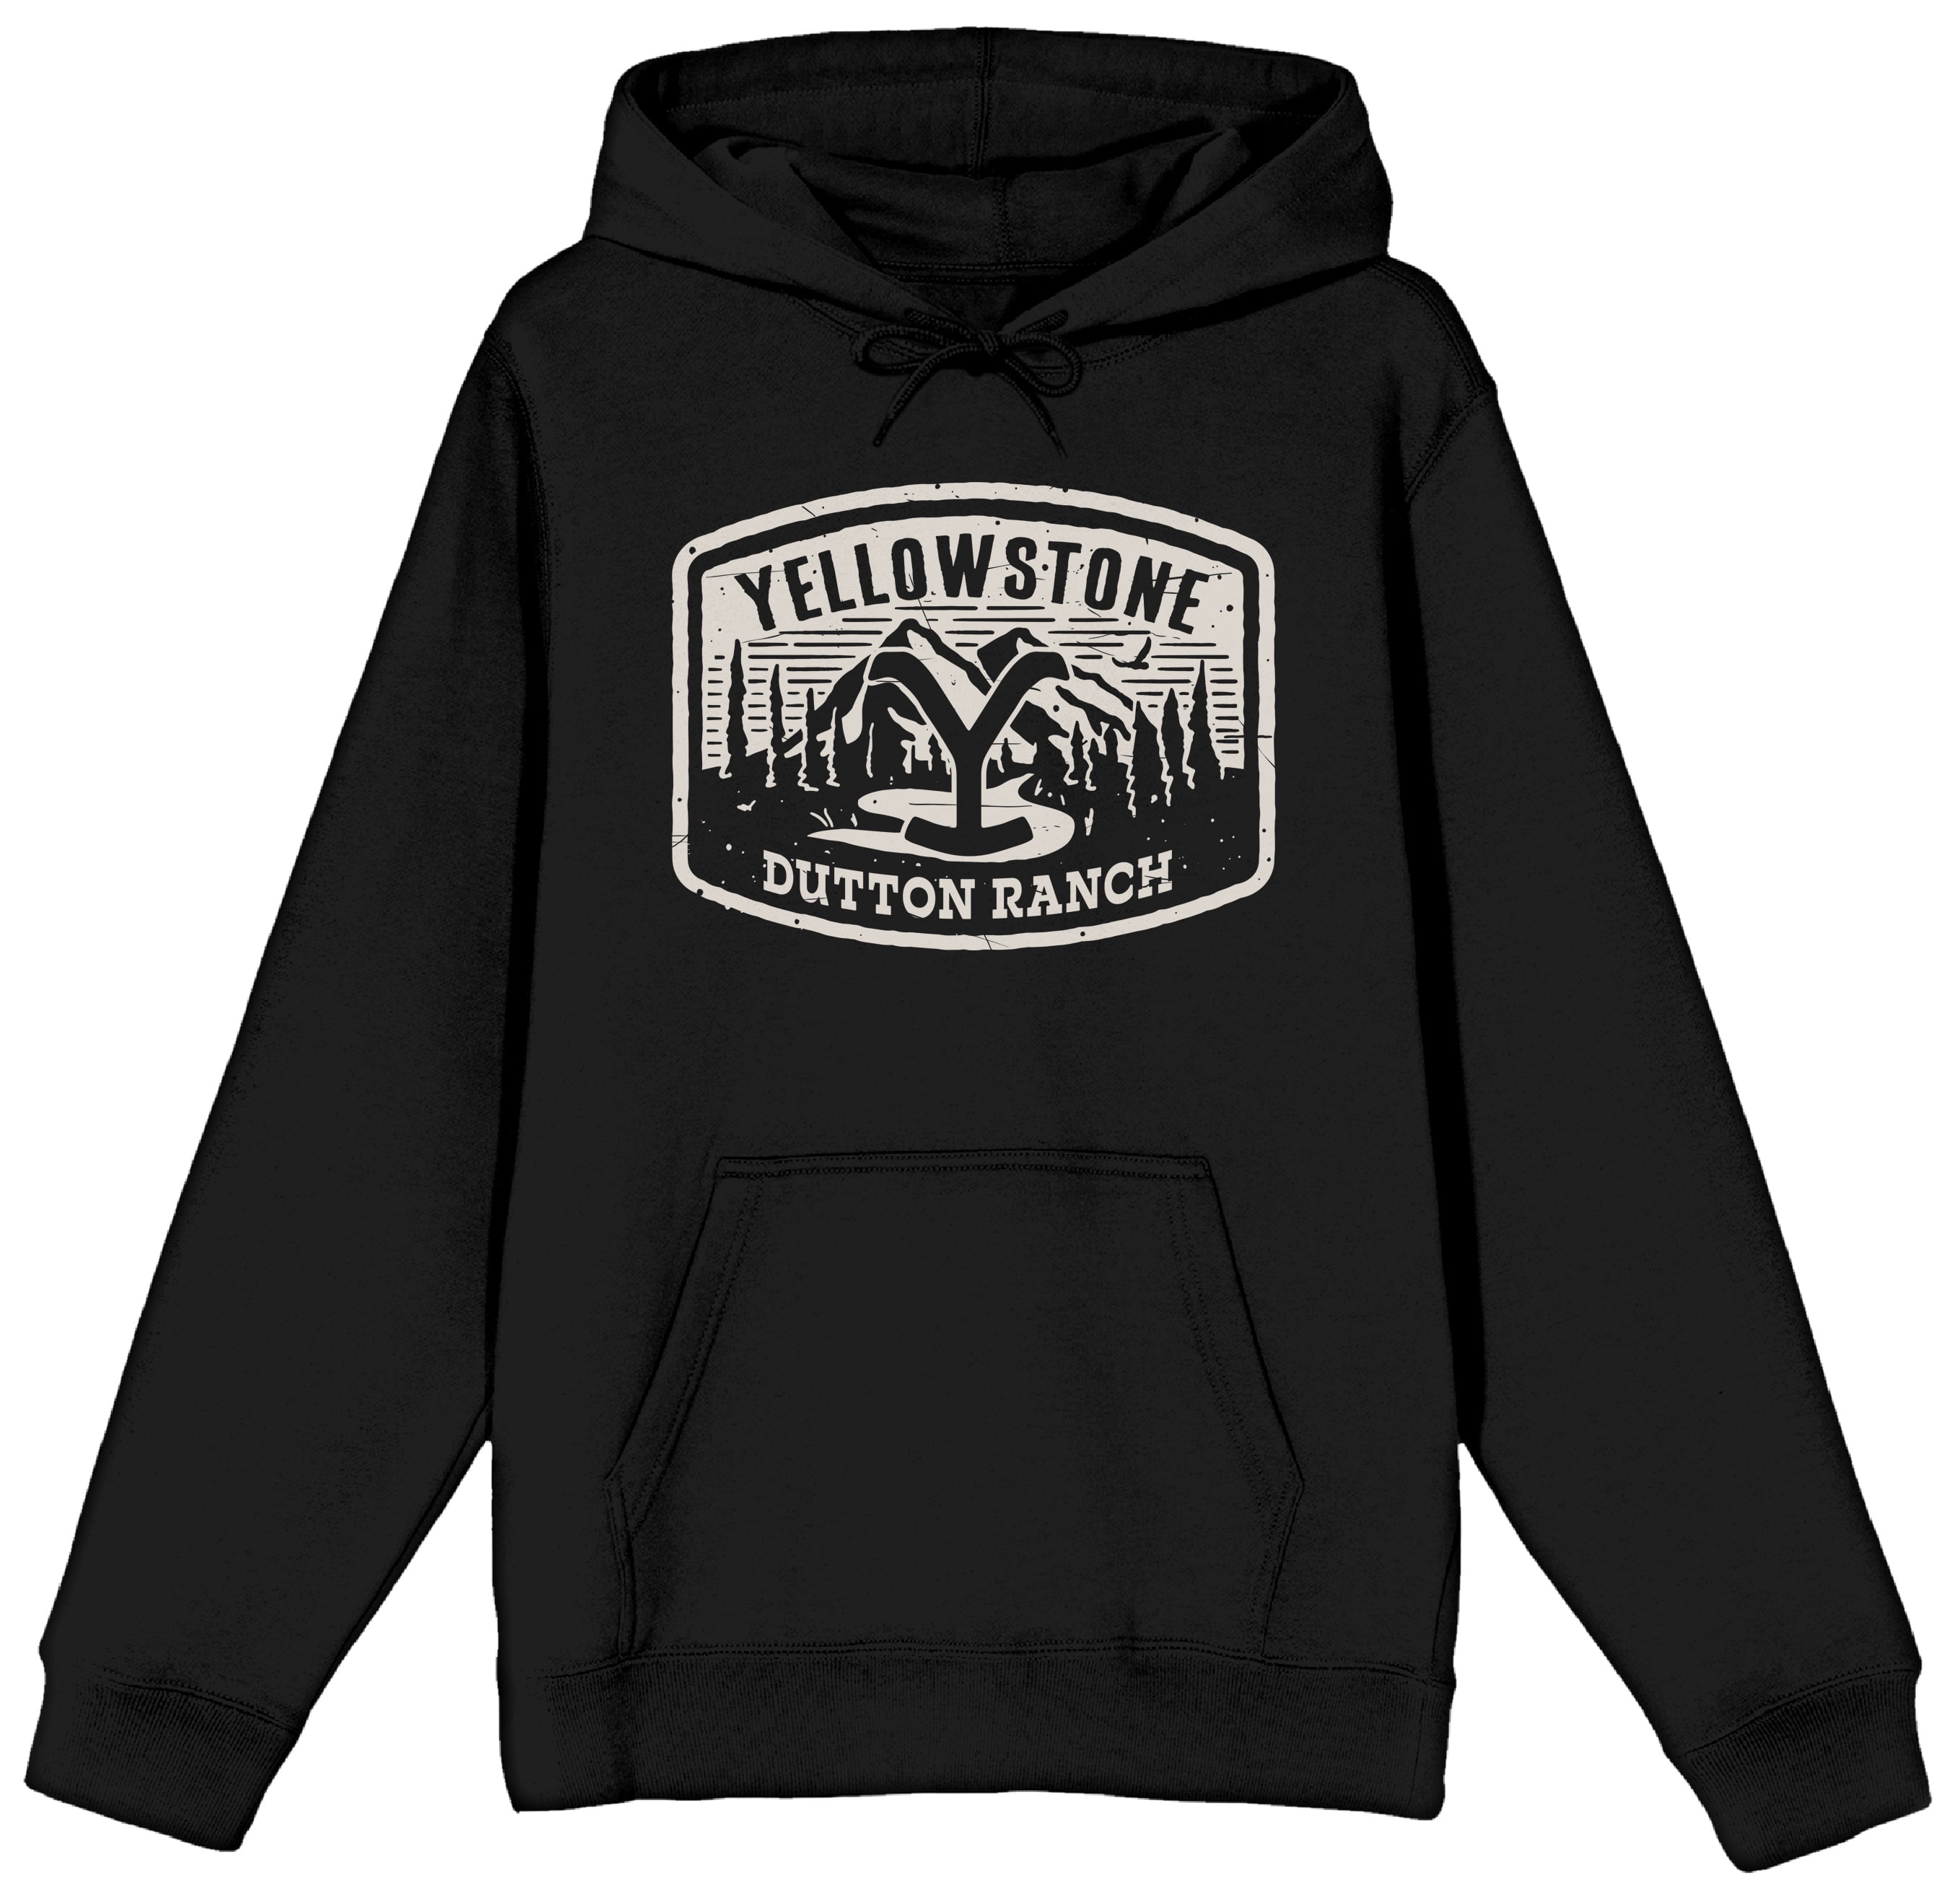 You Wouldnt Understand Hoodie Shirt Black baken Its A Ginger Thing 